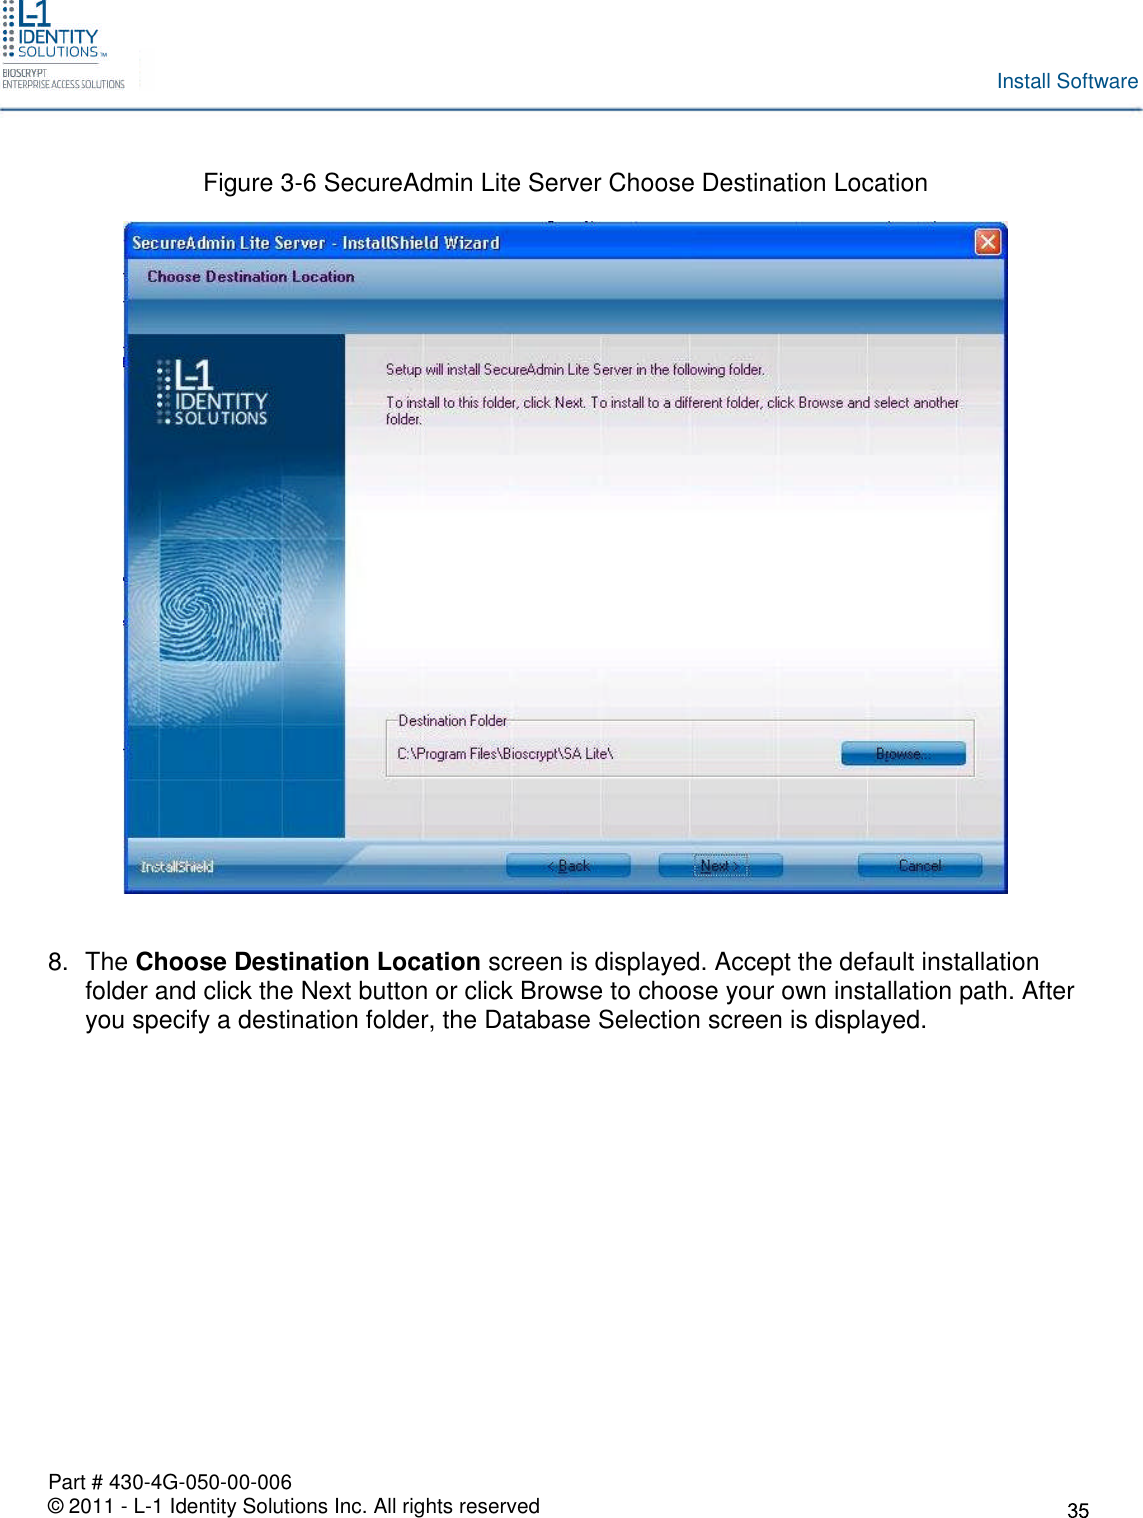 Part # 430-4G-050-00-006© 2011 - L-1 Identity Solutions Inc. All rights reservedInstall SoftwareFigure 3-6 SecureAdmin Lite Server Choose Destination Location8. The Choose Destination Location screen is displayed. Accept the default installationfolder and click the Next button or click Browse to choose your own installation path. Afteryou specify a destination folder, the Database Selection screen is displayed.